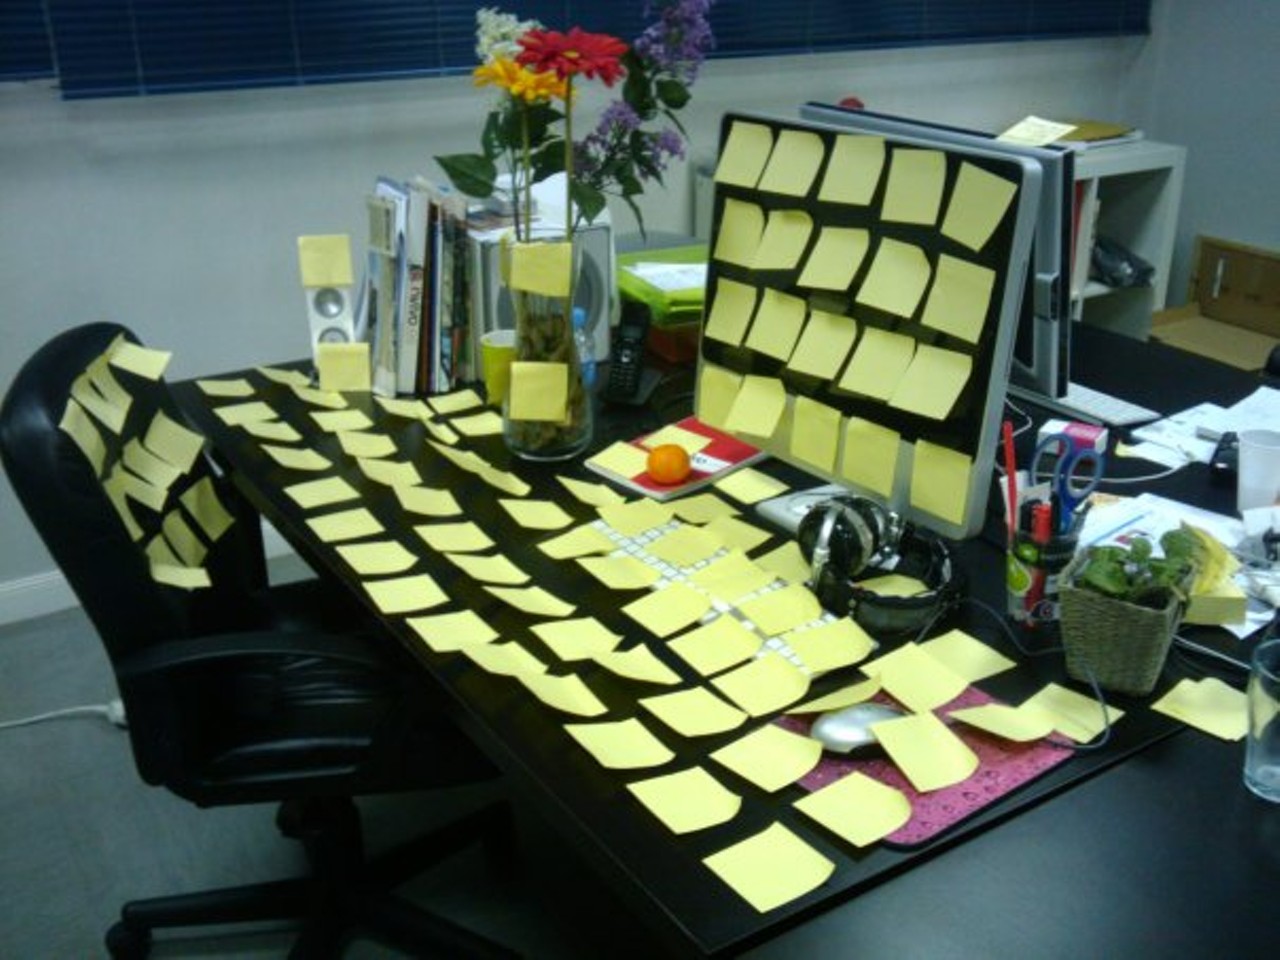 Sticky notes: handy yet annoying as shit when they're everywhere. (Photo via Flickr user 5gig)